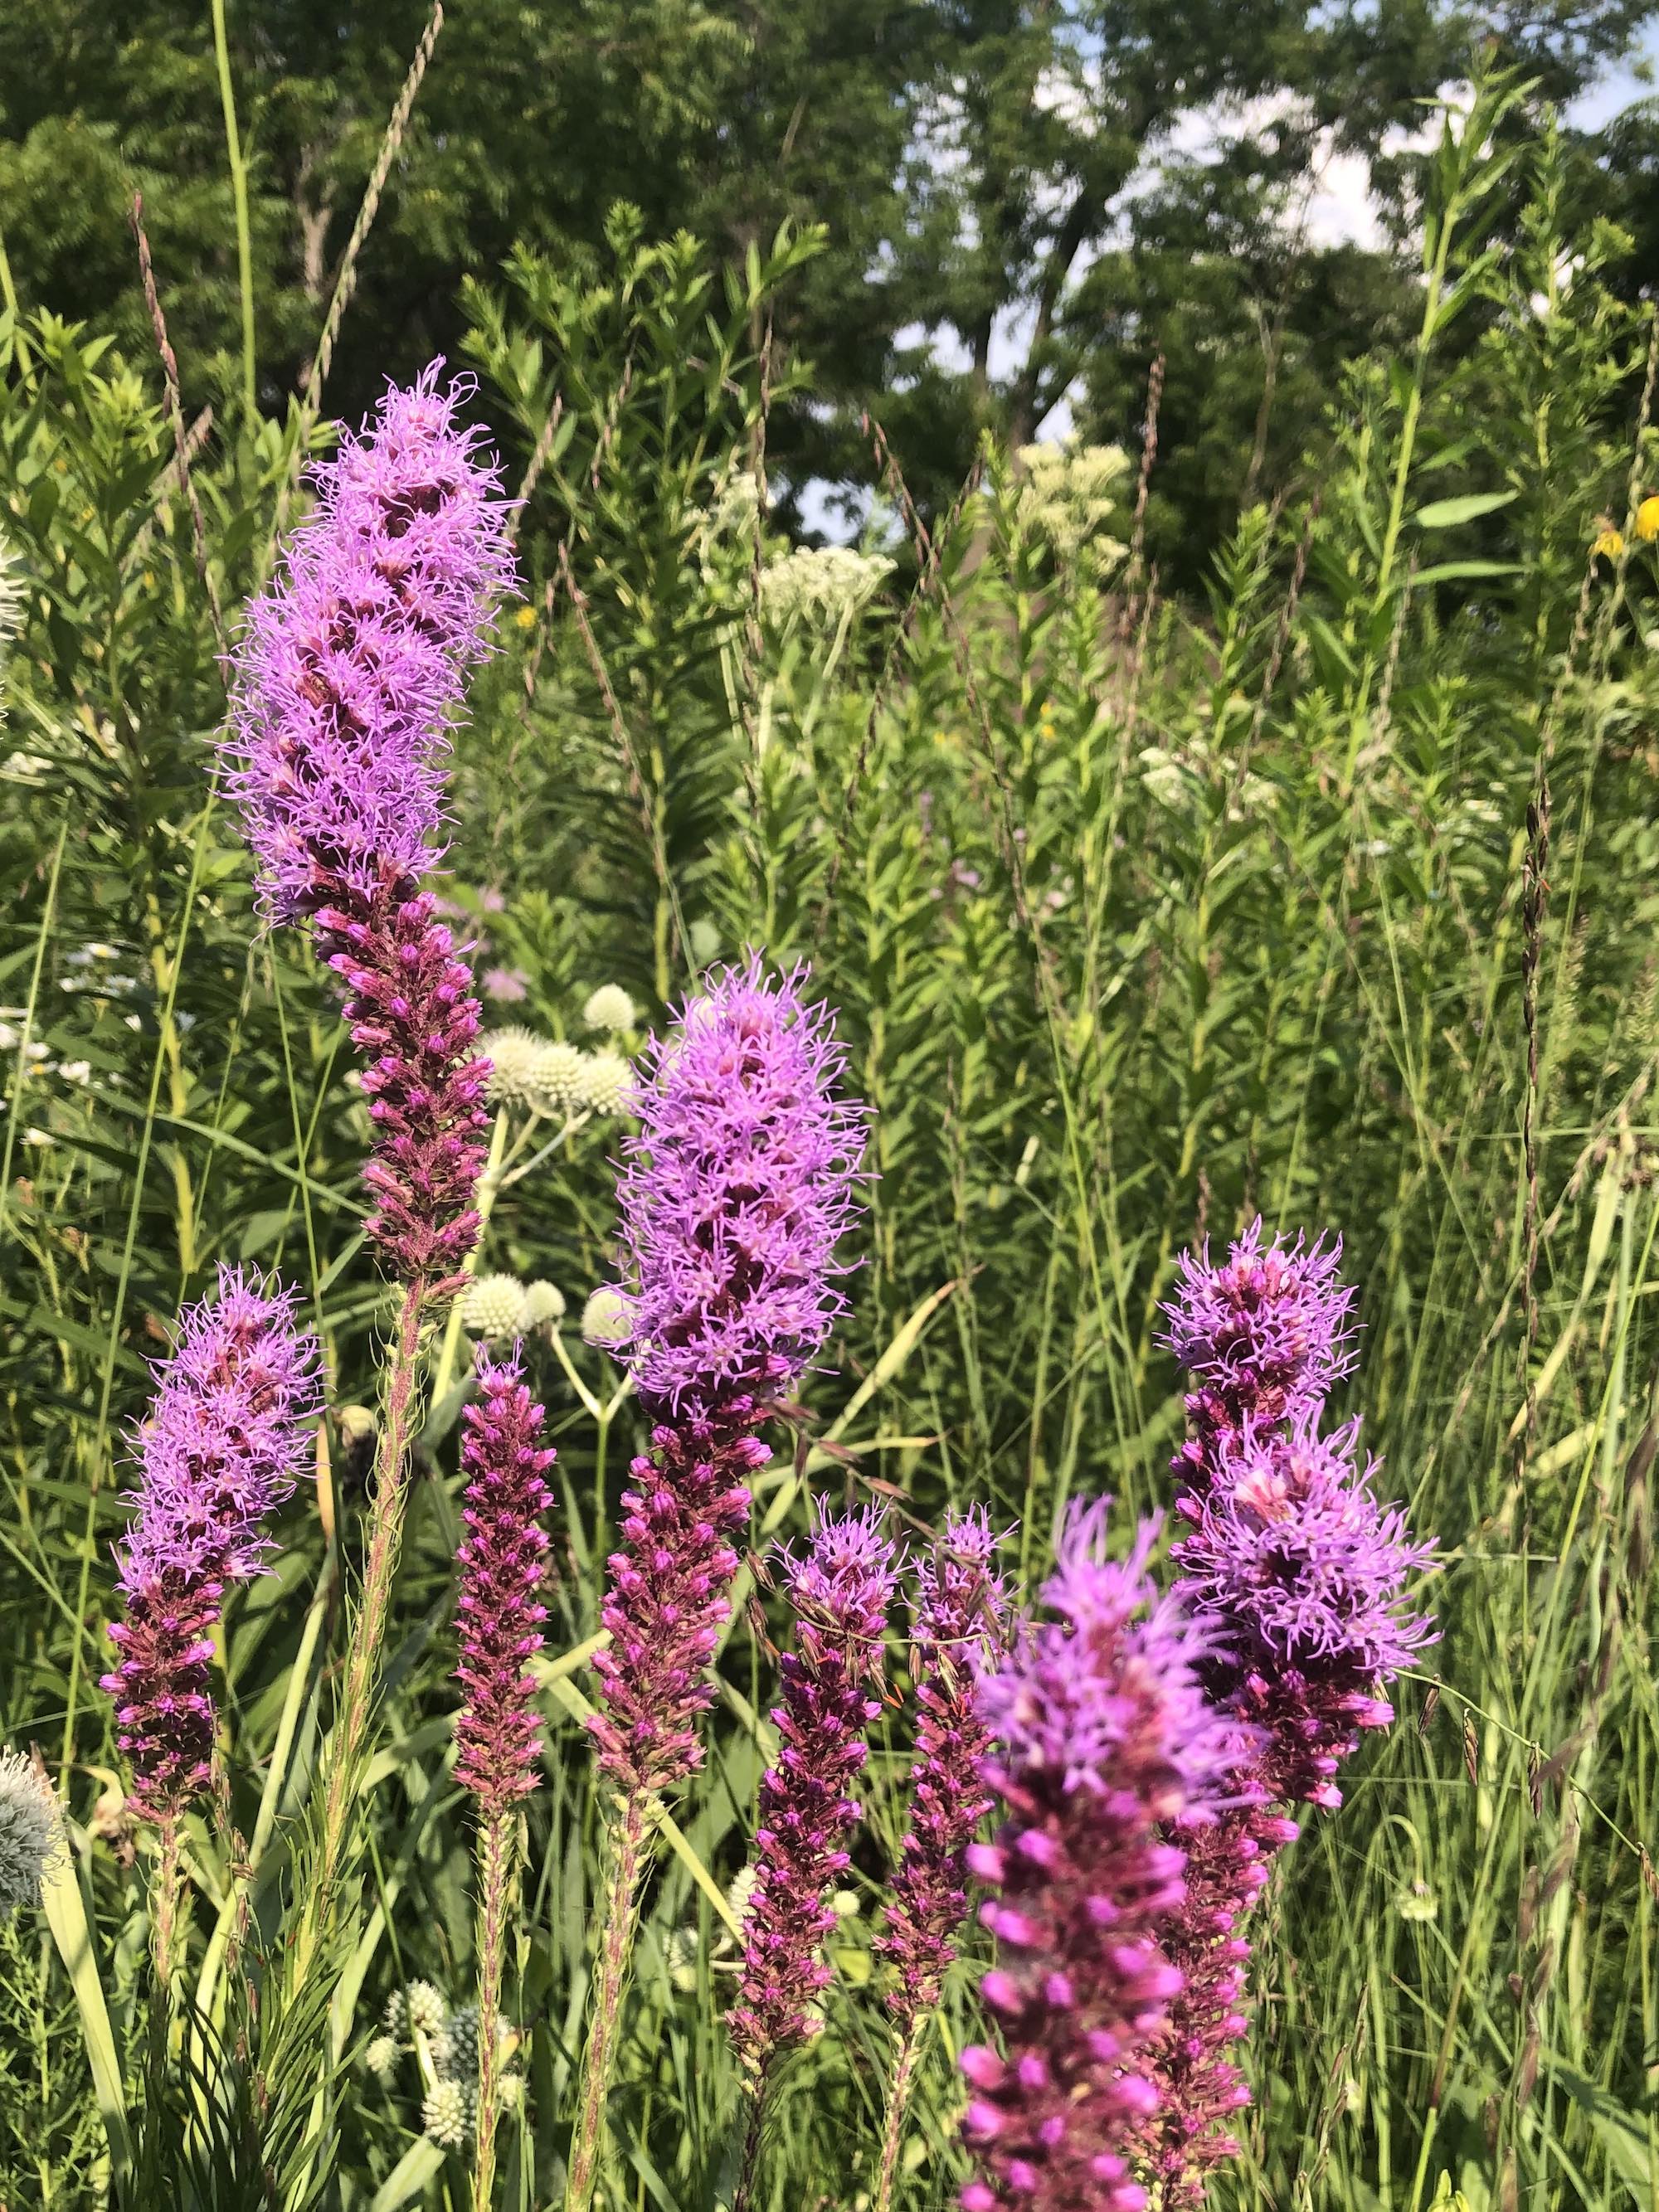 Prairie Blazing Star off of Bike Path behind Gregory Street in Madison, Wisconsin on July 16, 2021.